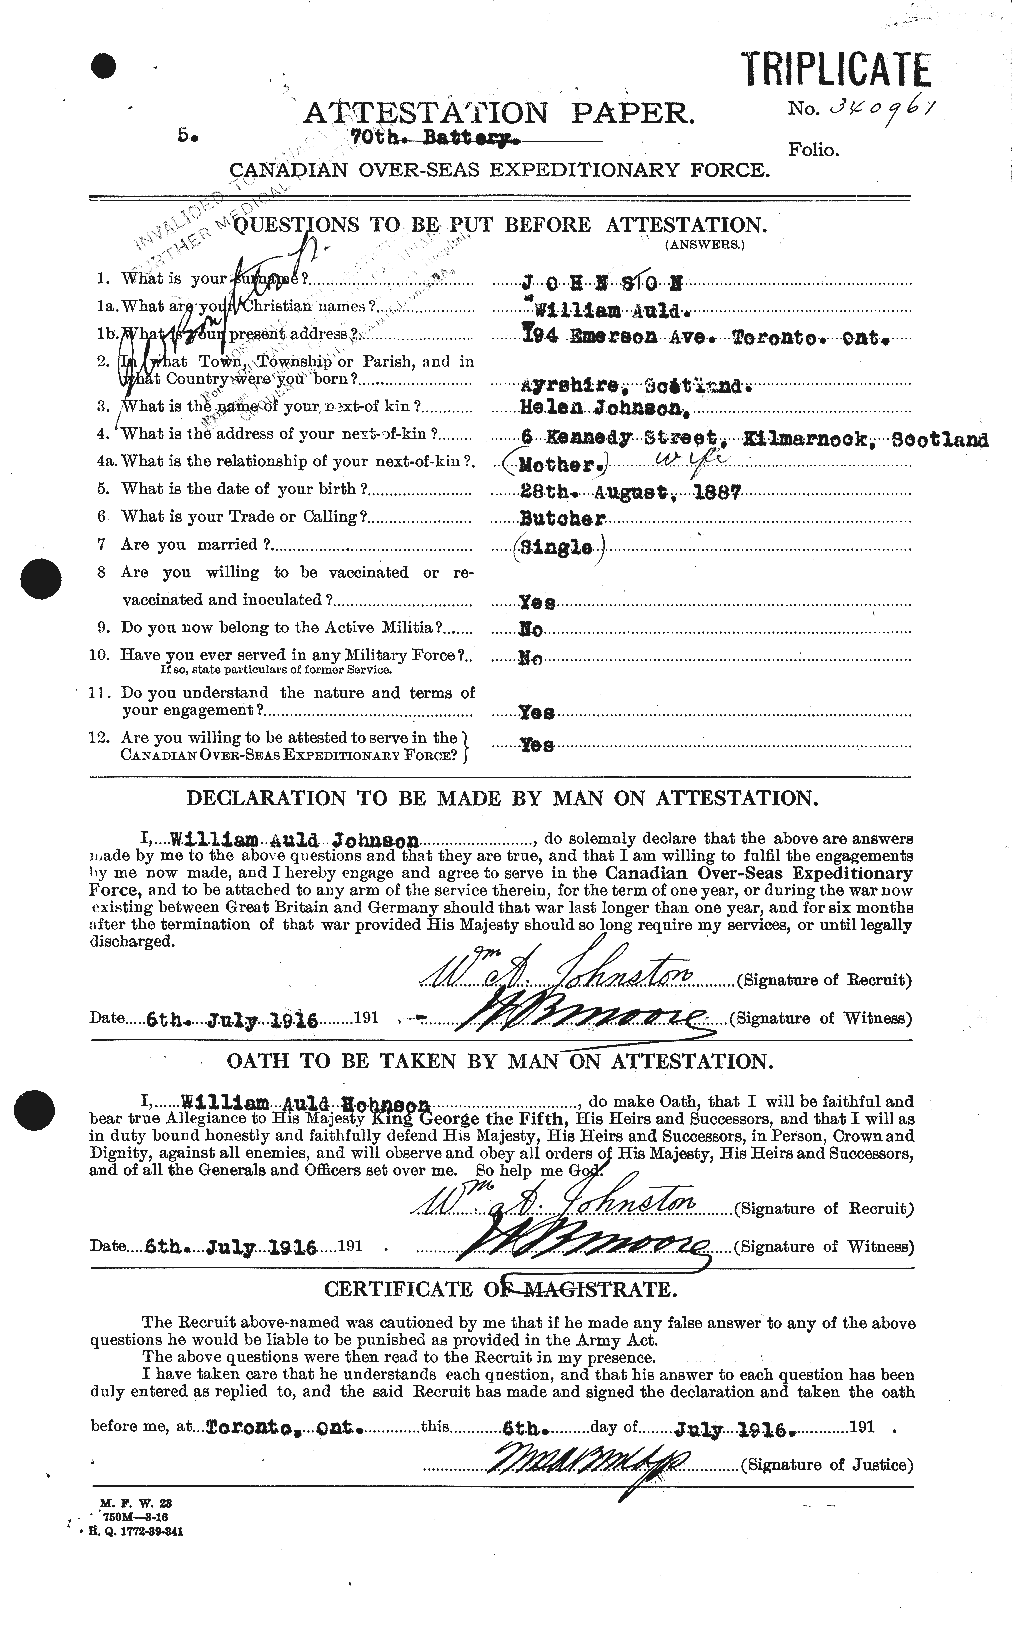 Personnel Records of the First World War - CEF 427303a